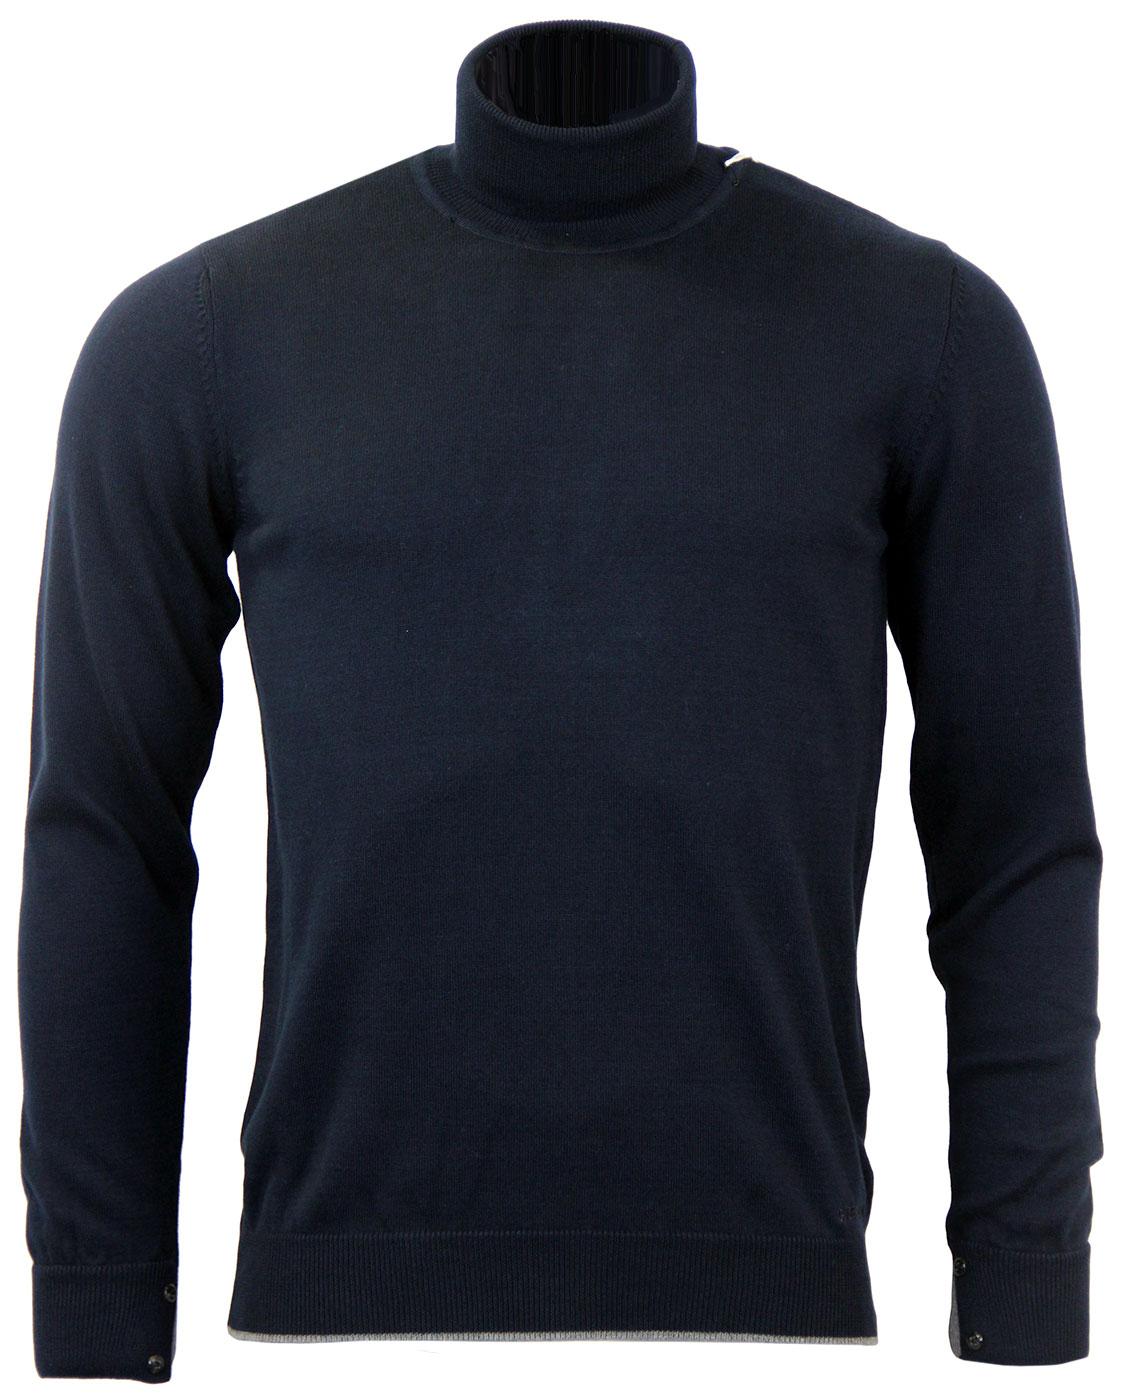 GUIDE LONDON Retro Mod Tipped Roll Neck Jumper